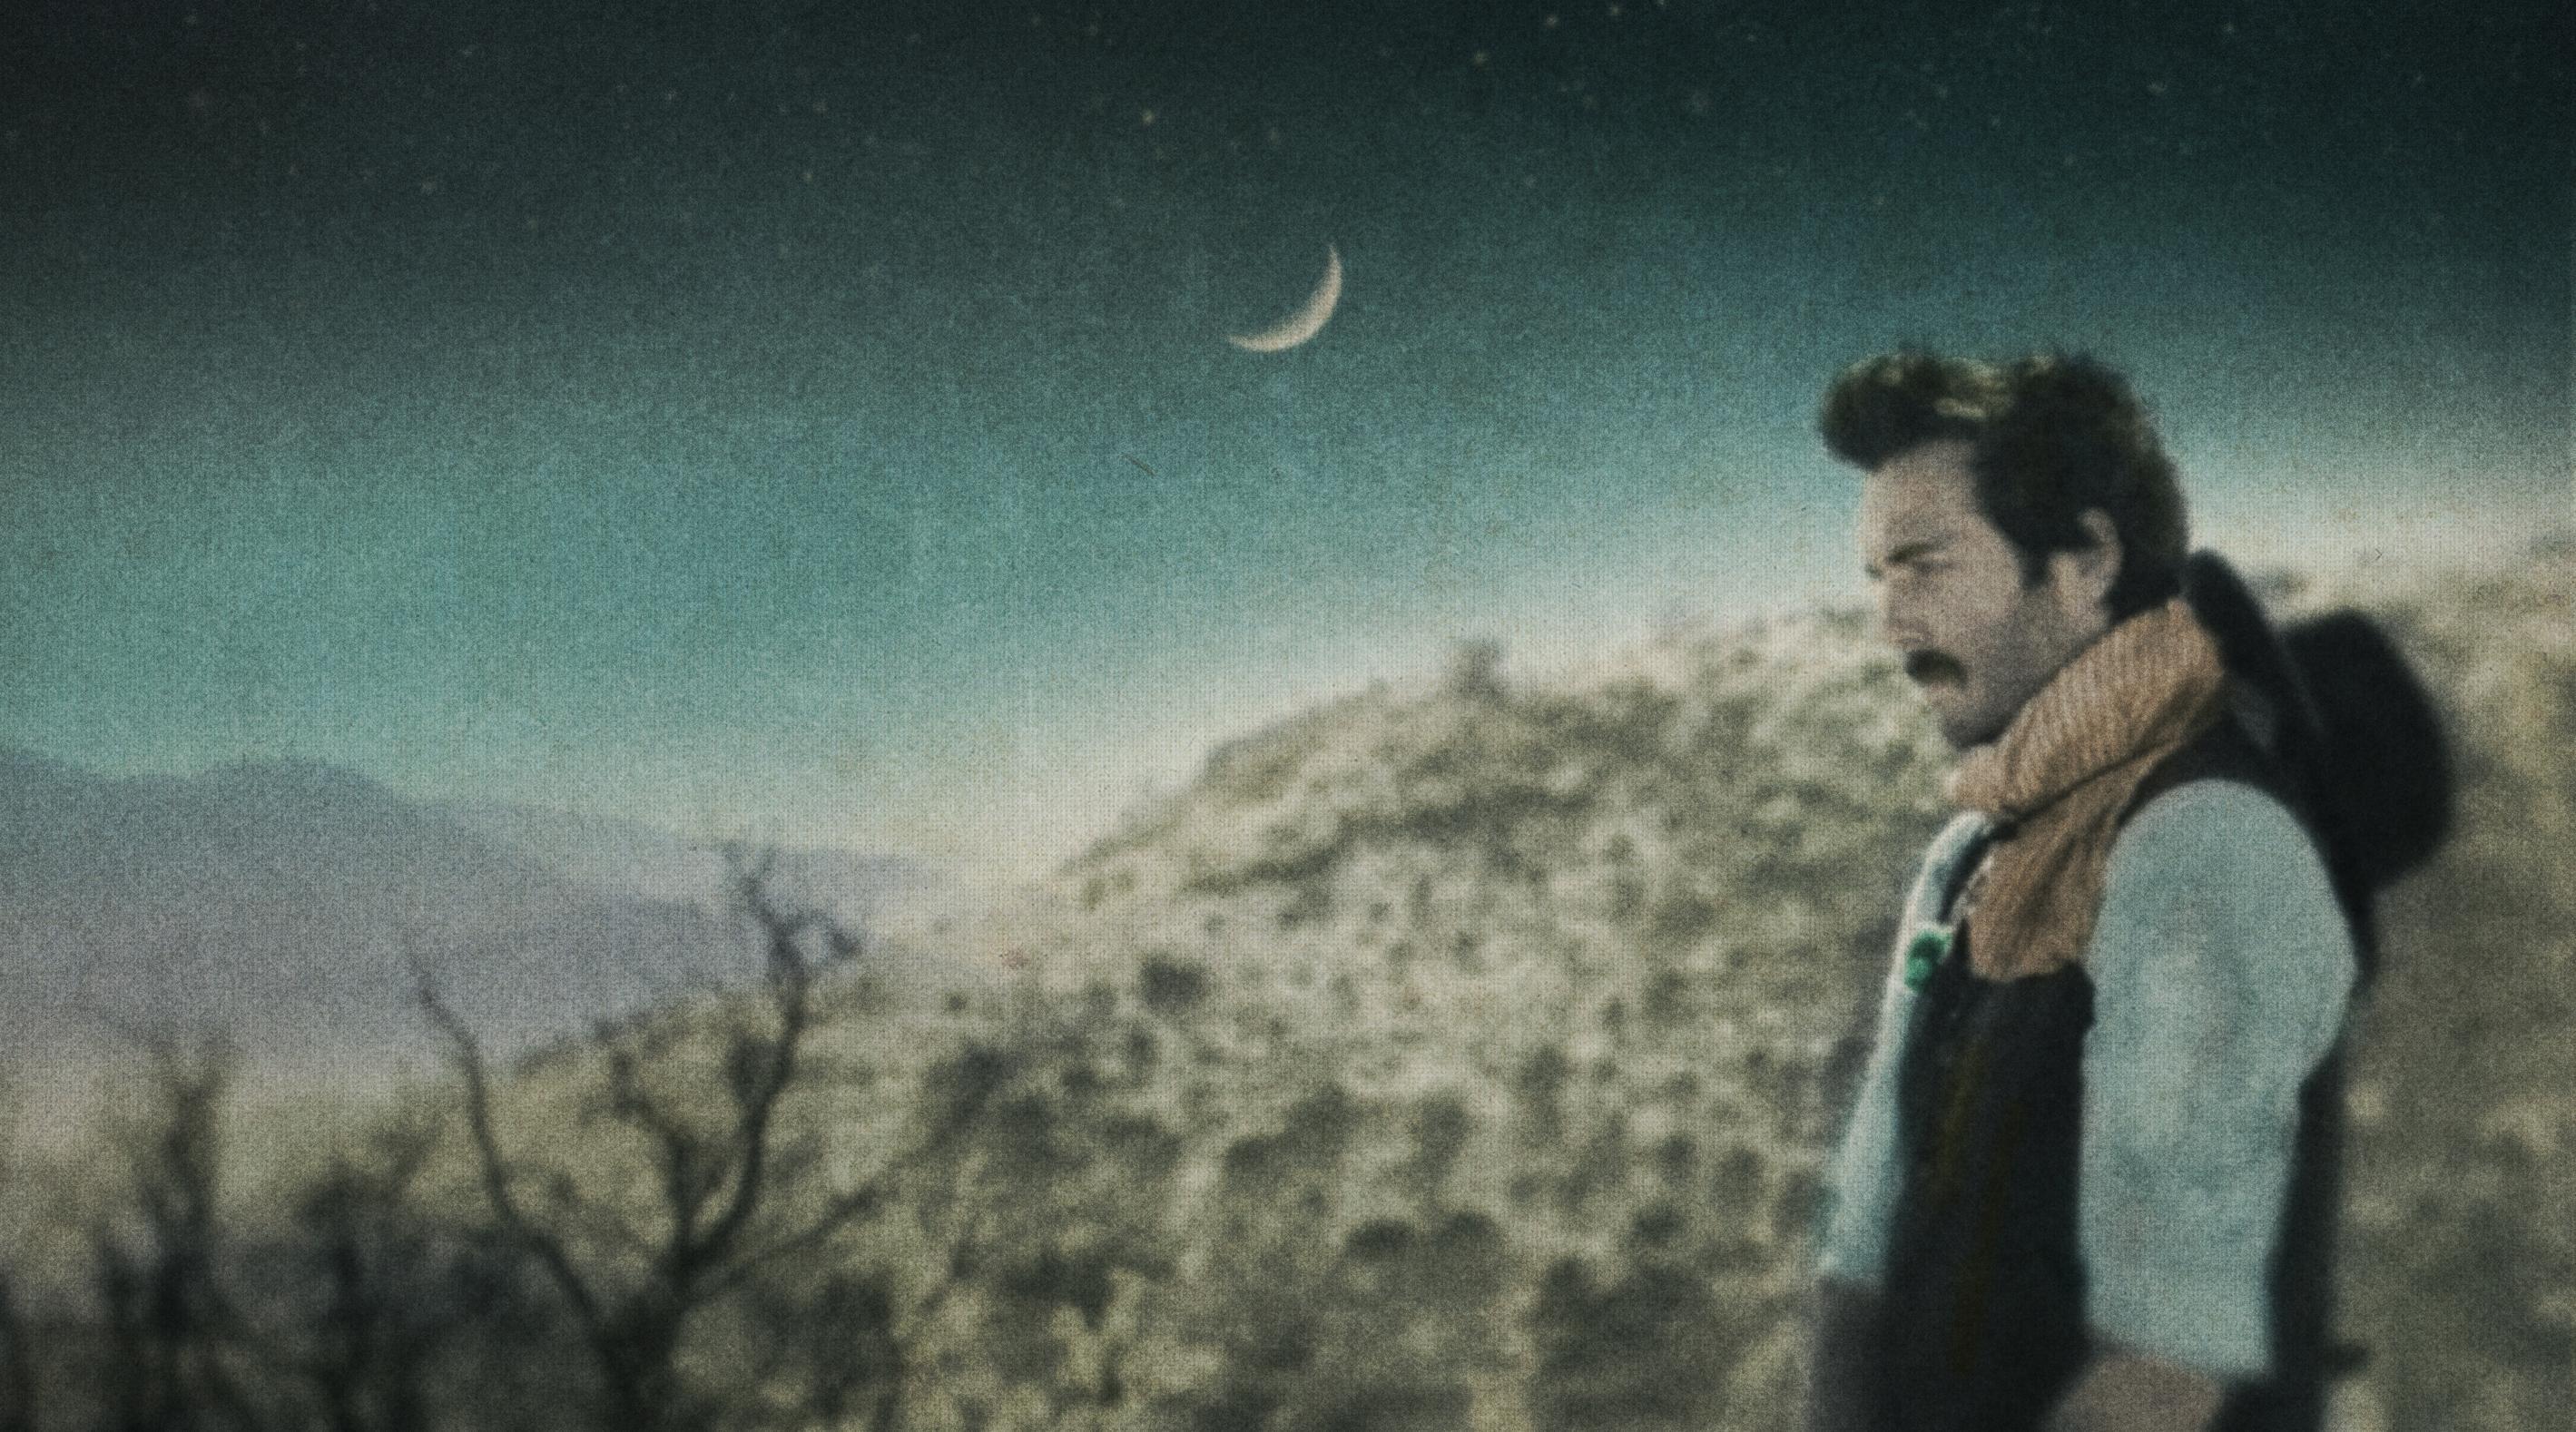 Lord Huron Wallpapers